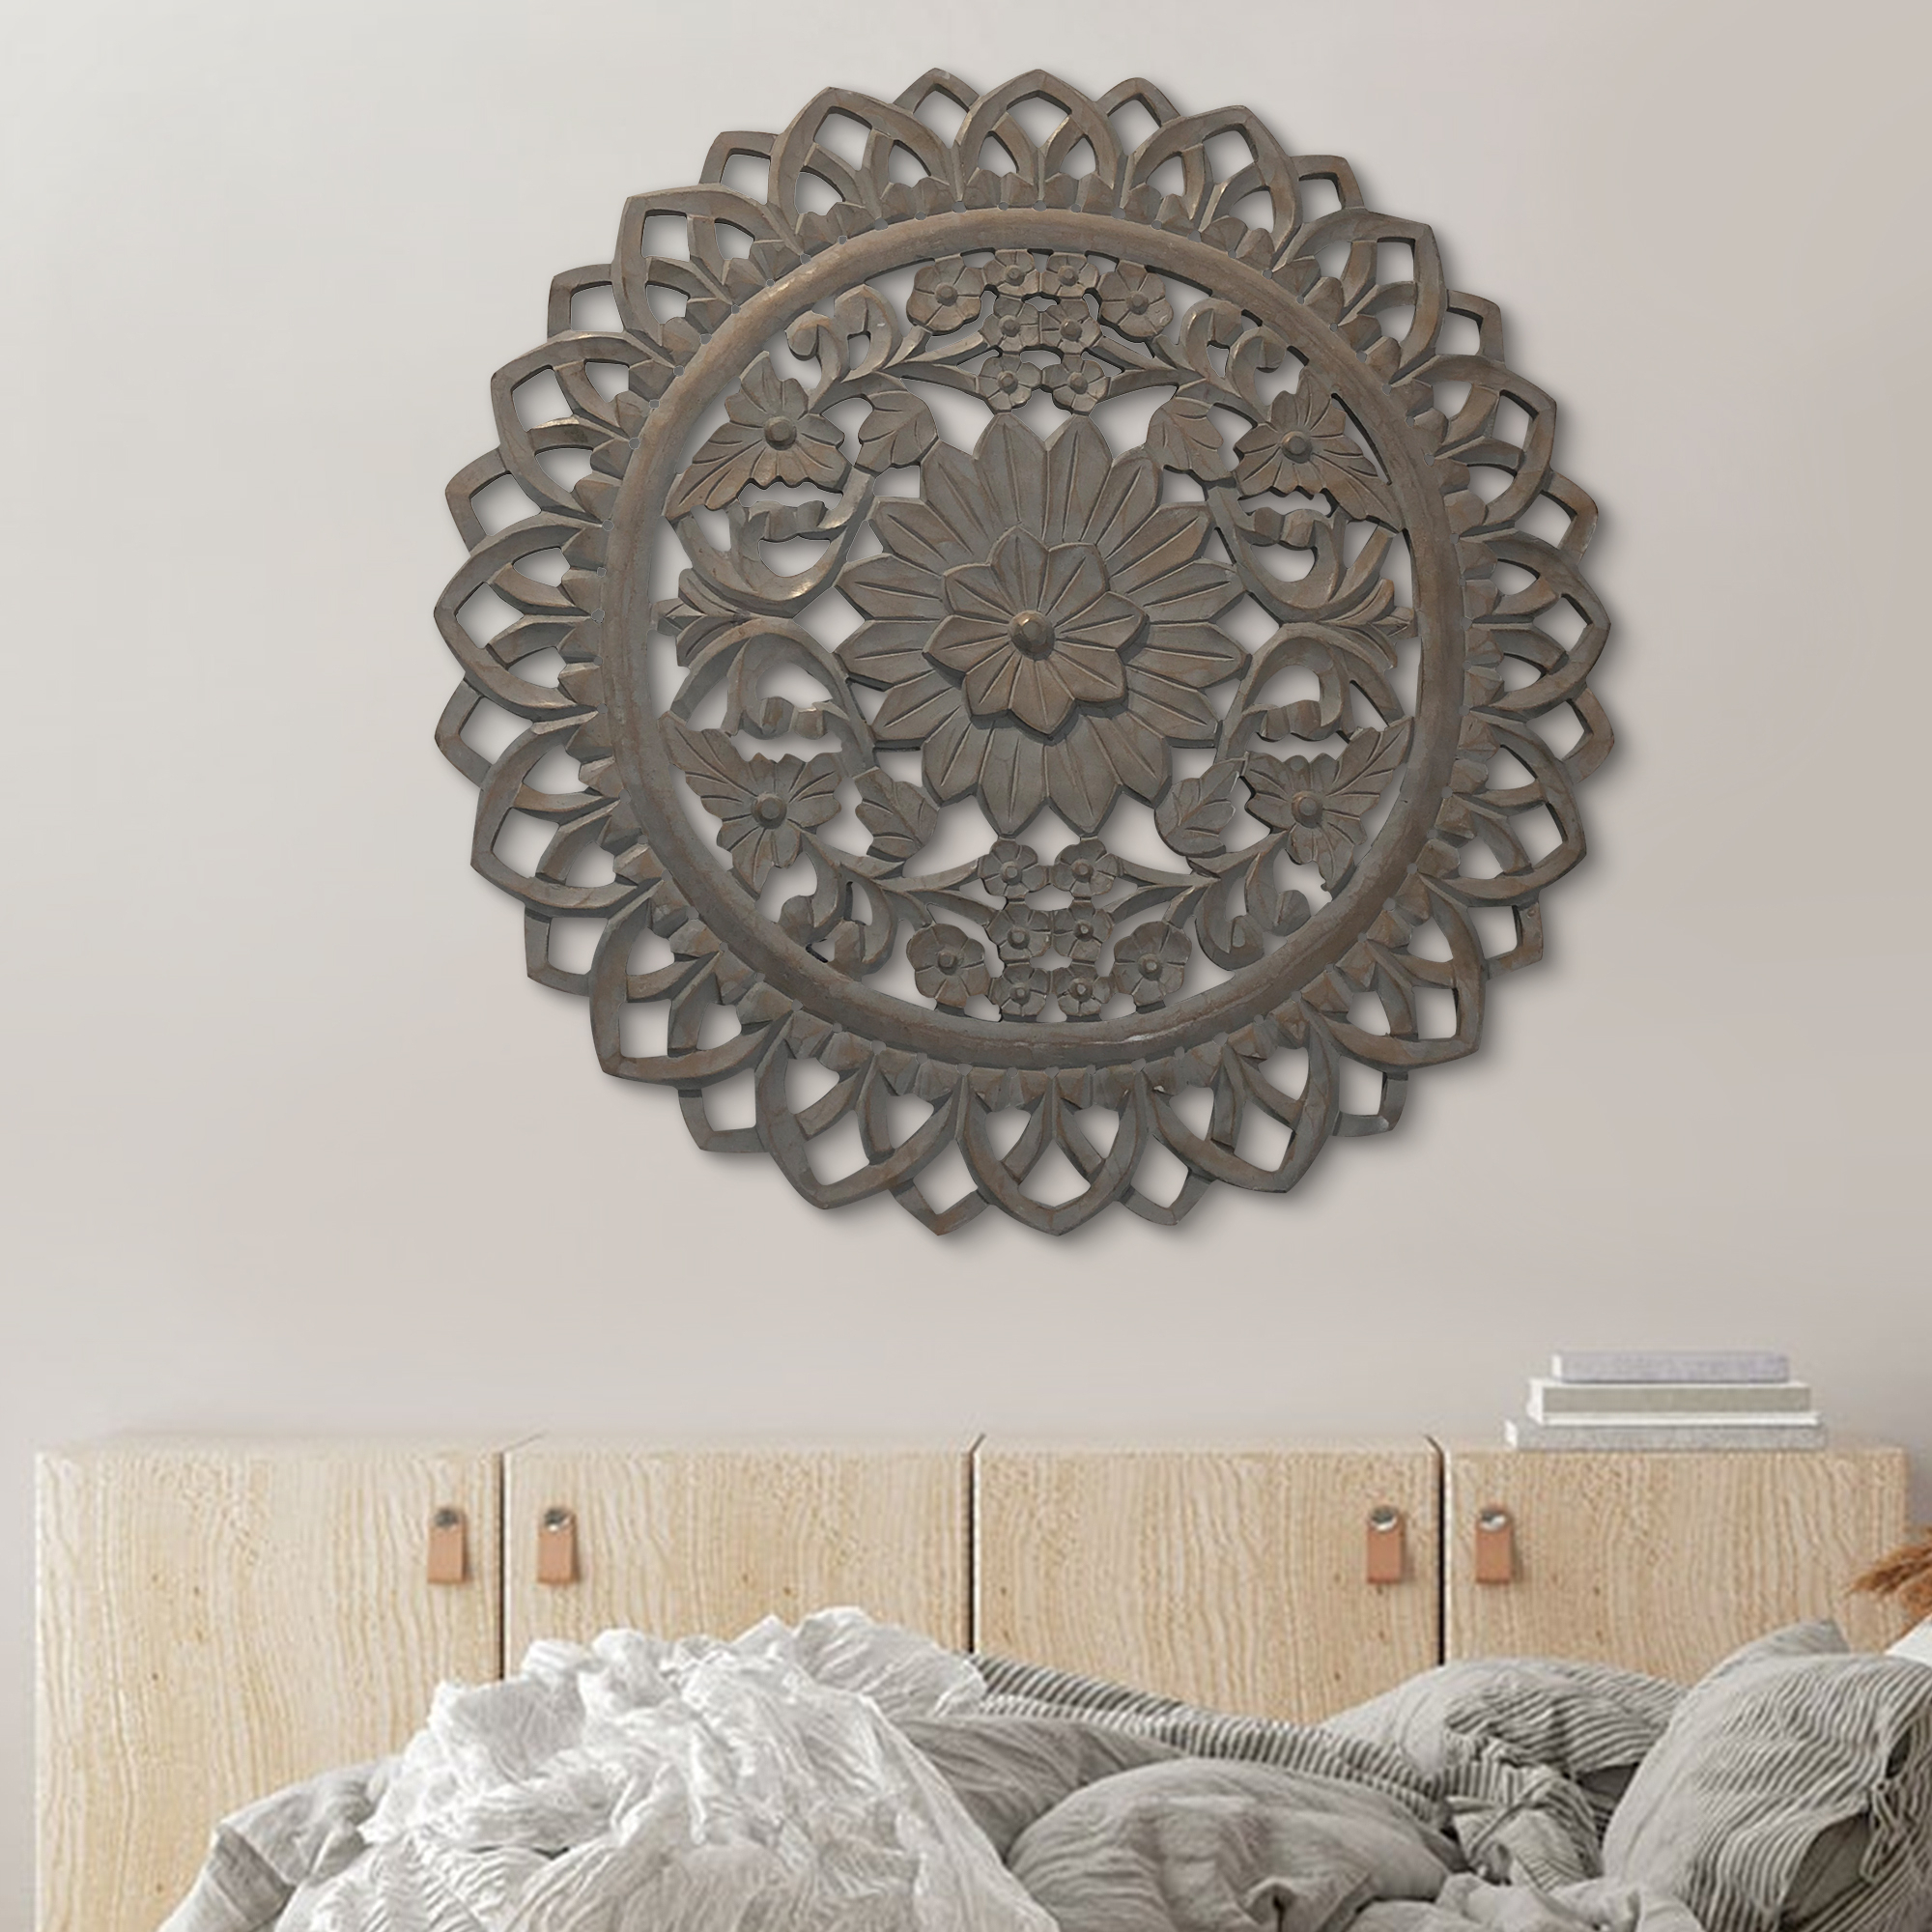 36 Inch Handcarved Wooden Round Wall Art With Floral Carving, Distressed Brown- Saltoro Sherpi